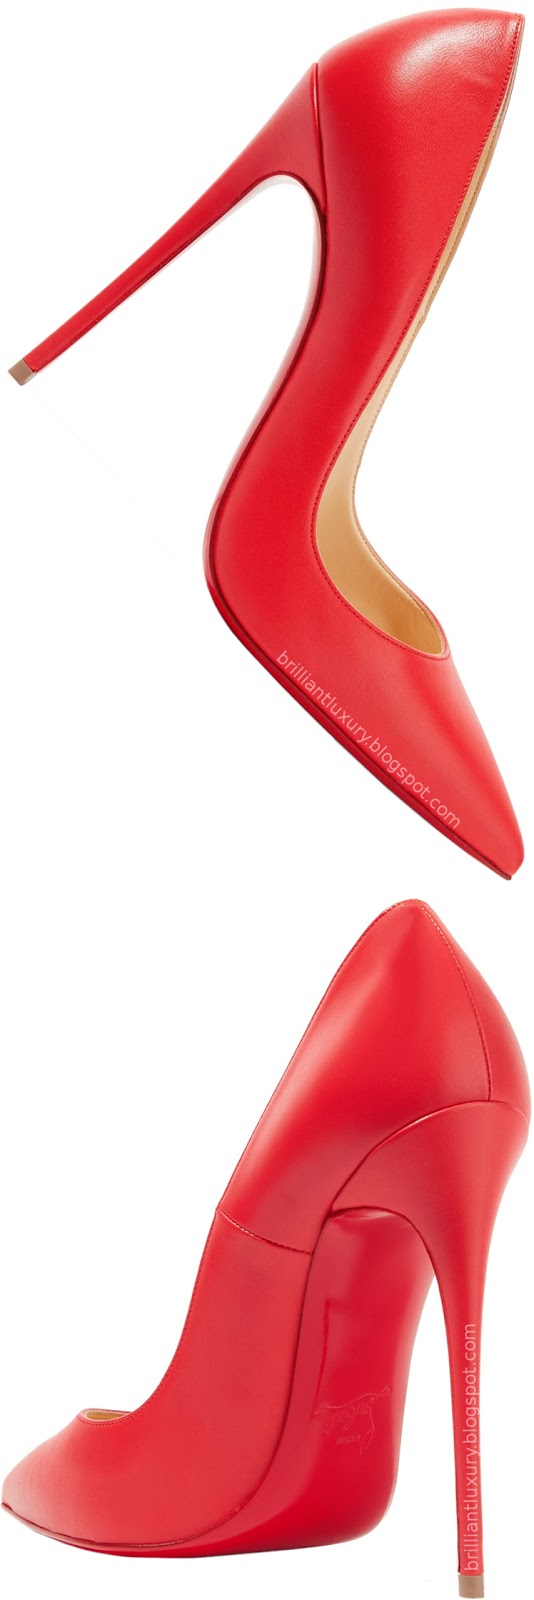 Brilliant Luxury ♦ Christian Louboutin So Kate red leather pumps